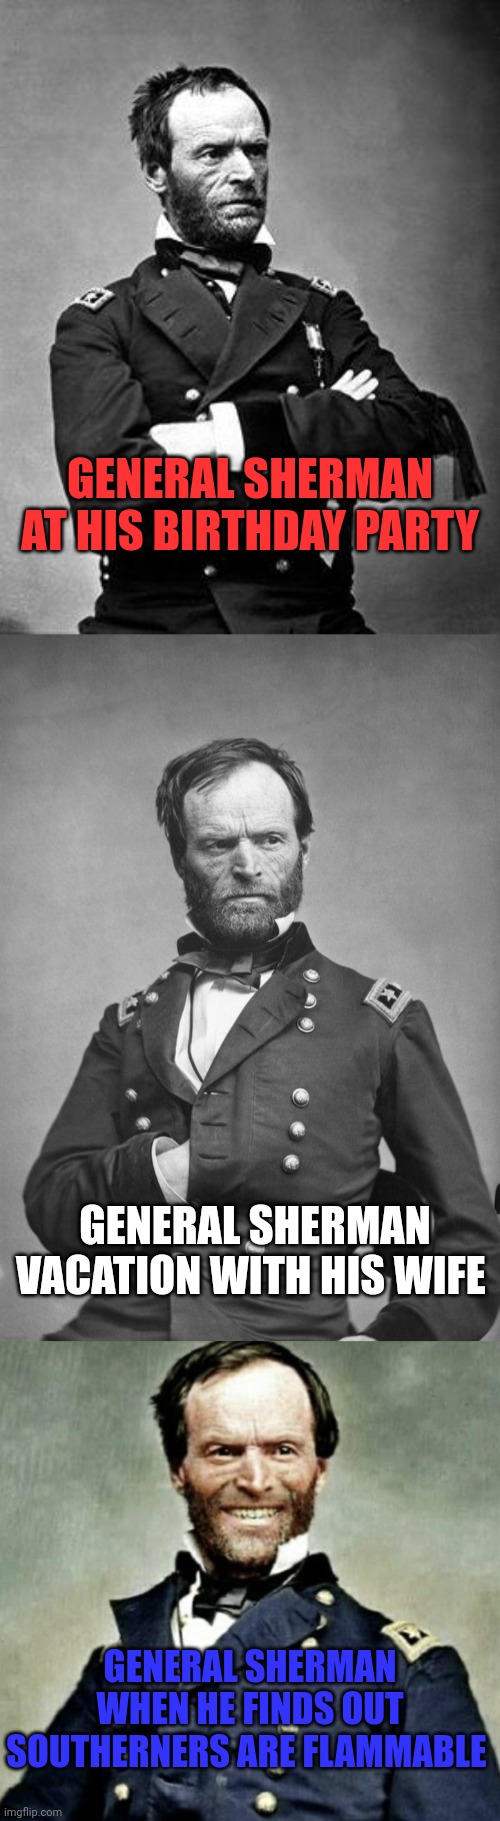 *immflamable. Fify. | GENERAL SHERMAN AT HIS BIRTHDAY PARTY; GENERAL SHERMAN VACATION WITH HIS WIFE; GENERAL SHERMAN WHEN HE FINDS OUT SOUTHERNERS ARE FLAMMABLE | image tagged in general sherman,general sherman is happy,burn em,burn em all | made w/ Imgflip meme maker